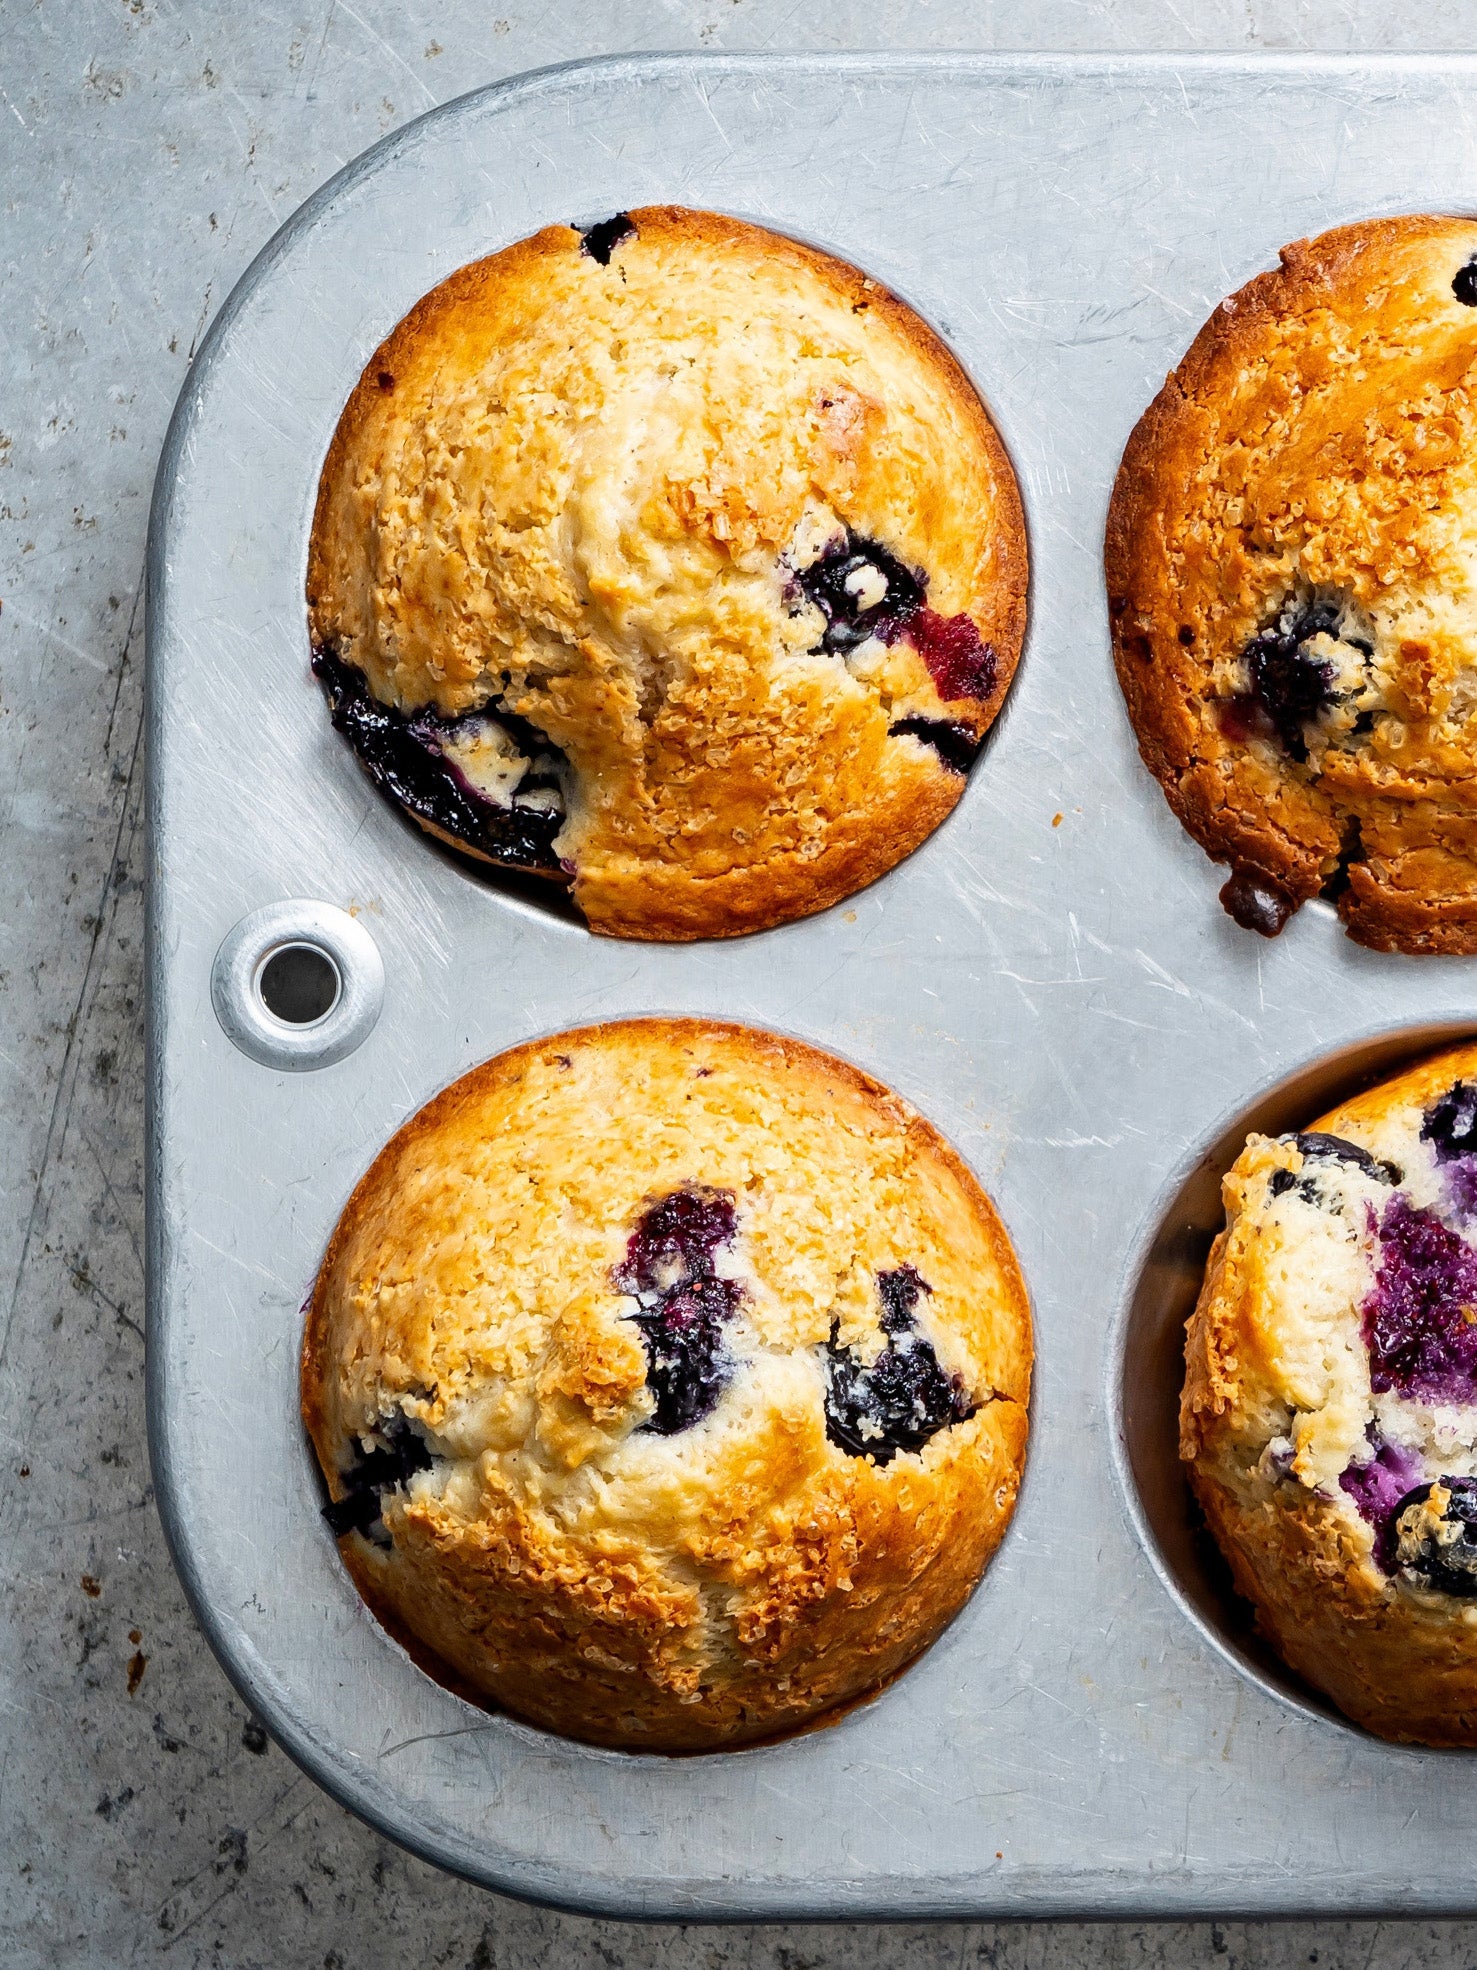 Relying on ice cream as a base gives these muffins extra moisture, richness and sweetness